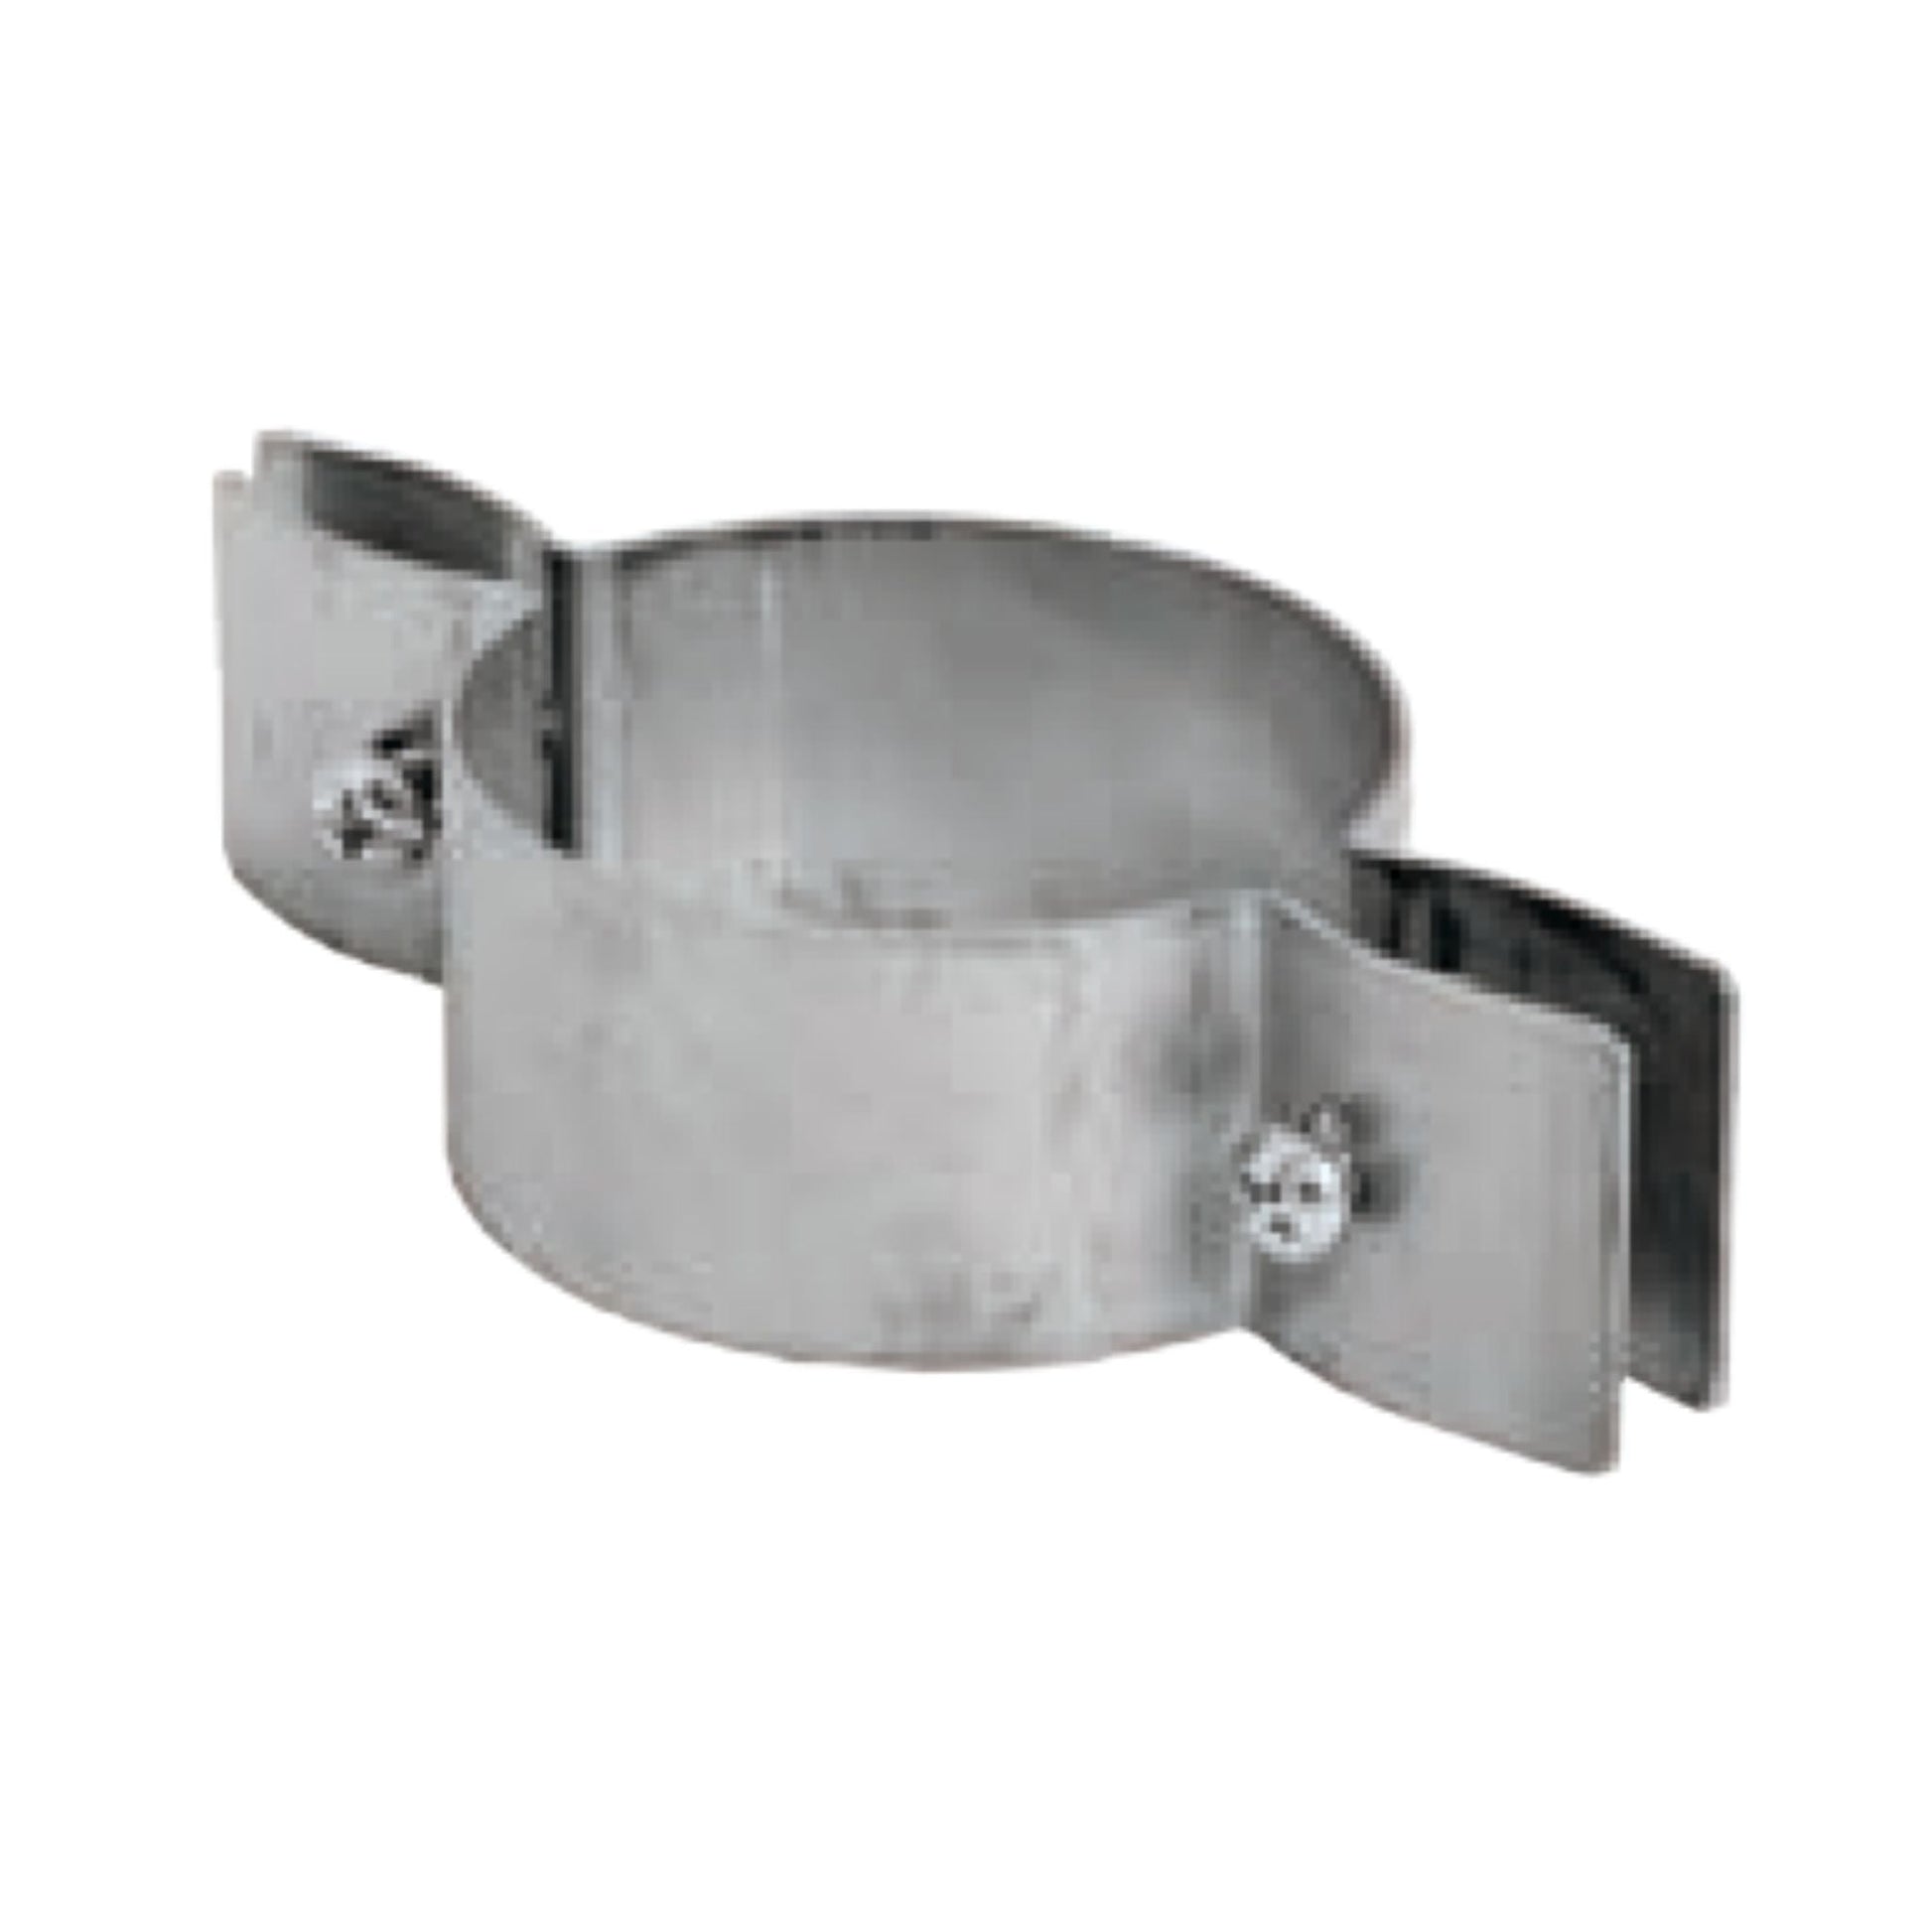 DuraVent FasNSeal 10" 29-4C Stainless Steel Support Clamp